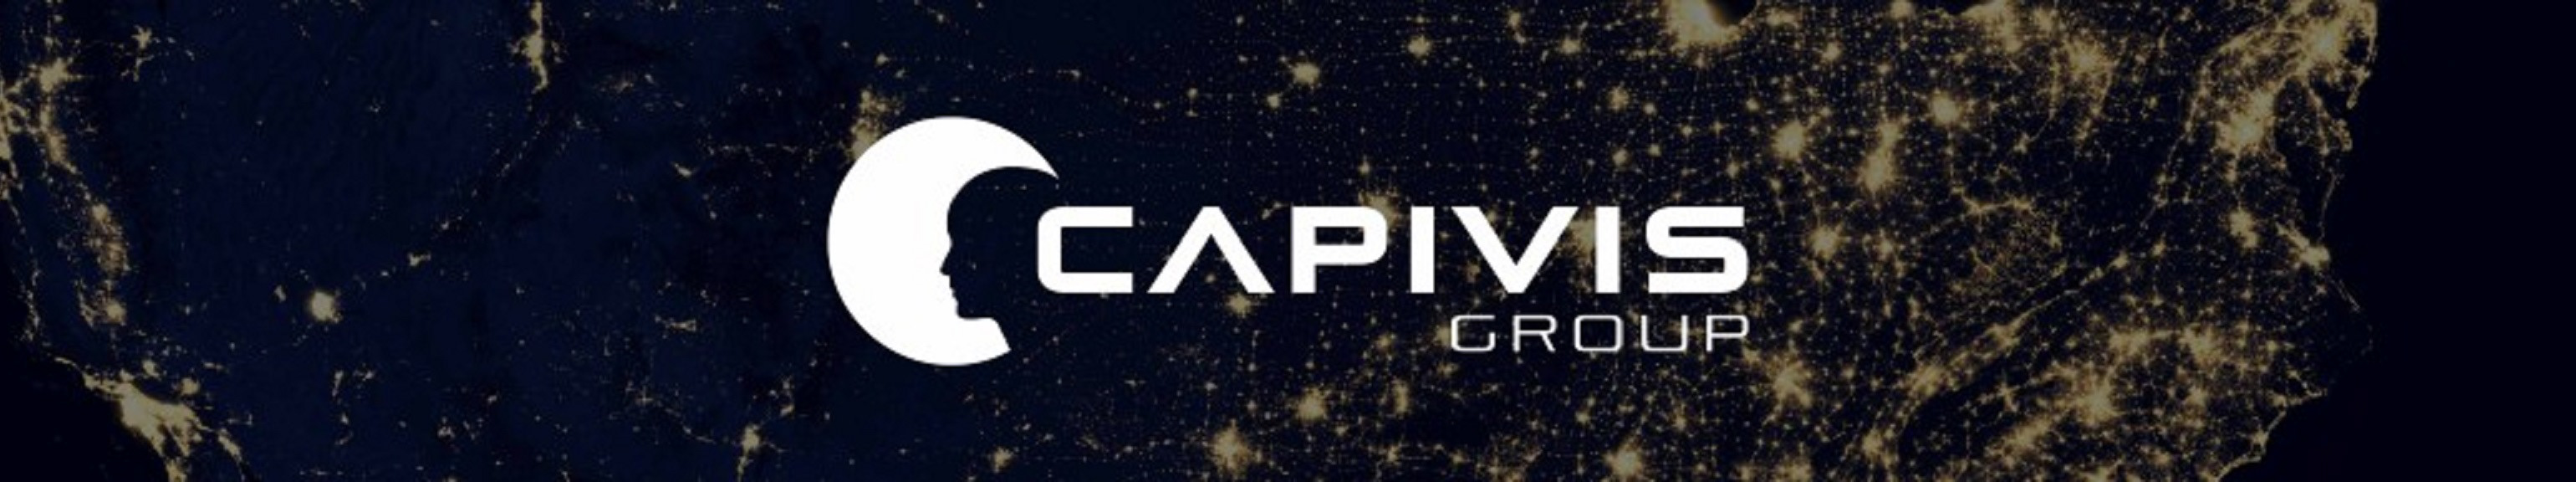 Capivis Group Business Optimization, Value Improvement & Growth Management Consulting Companies's profile banner